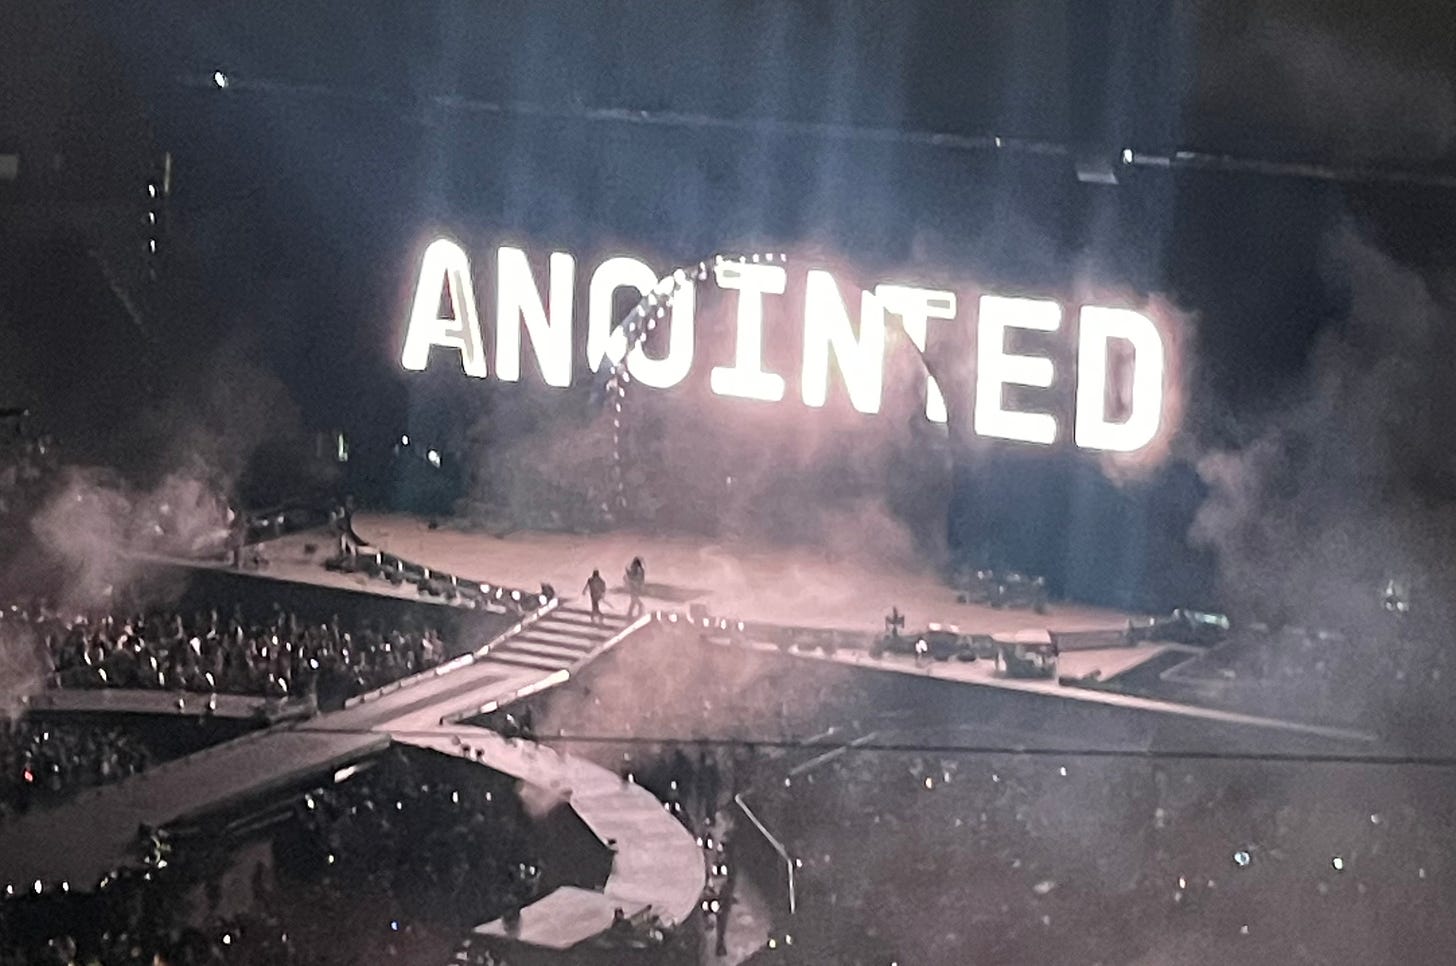 A personal photo taken at Beyonce's Renassiance tour, the stage is clear and the screen says Anointed in all caps and white lettering